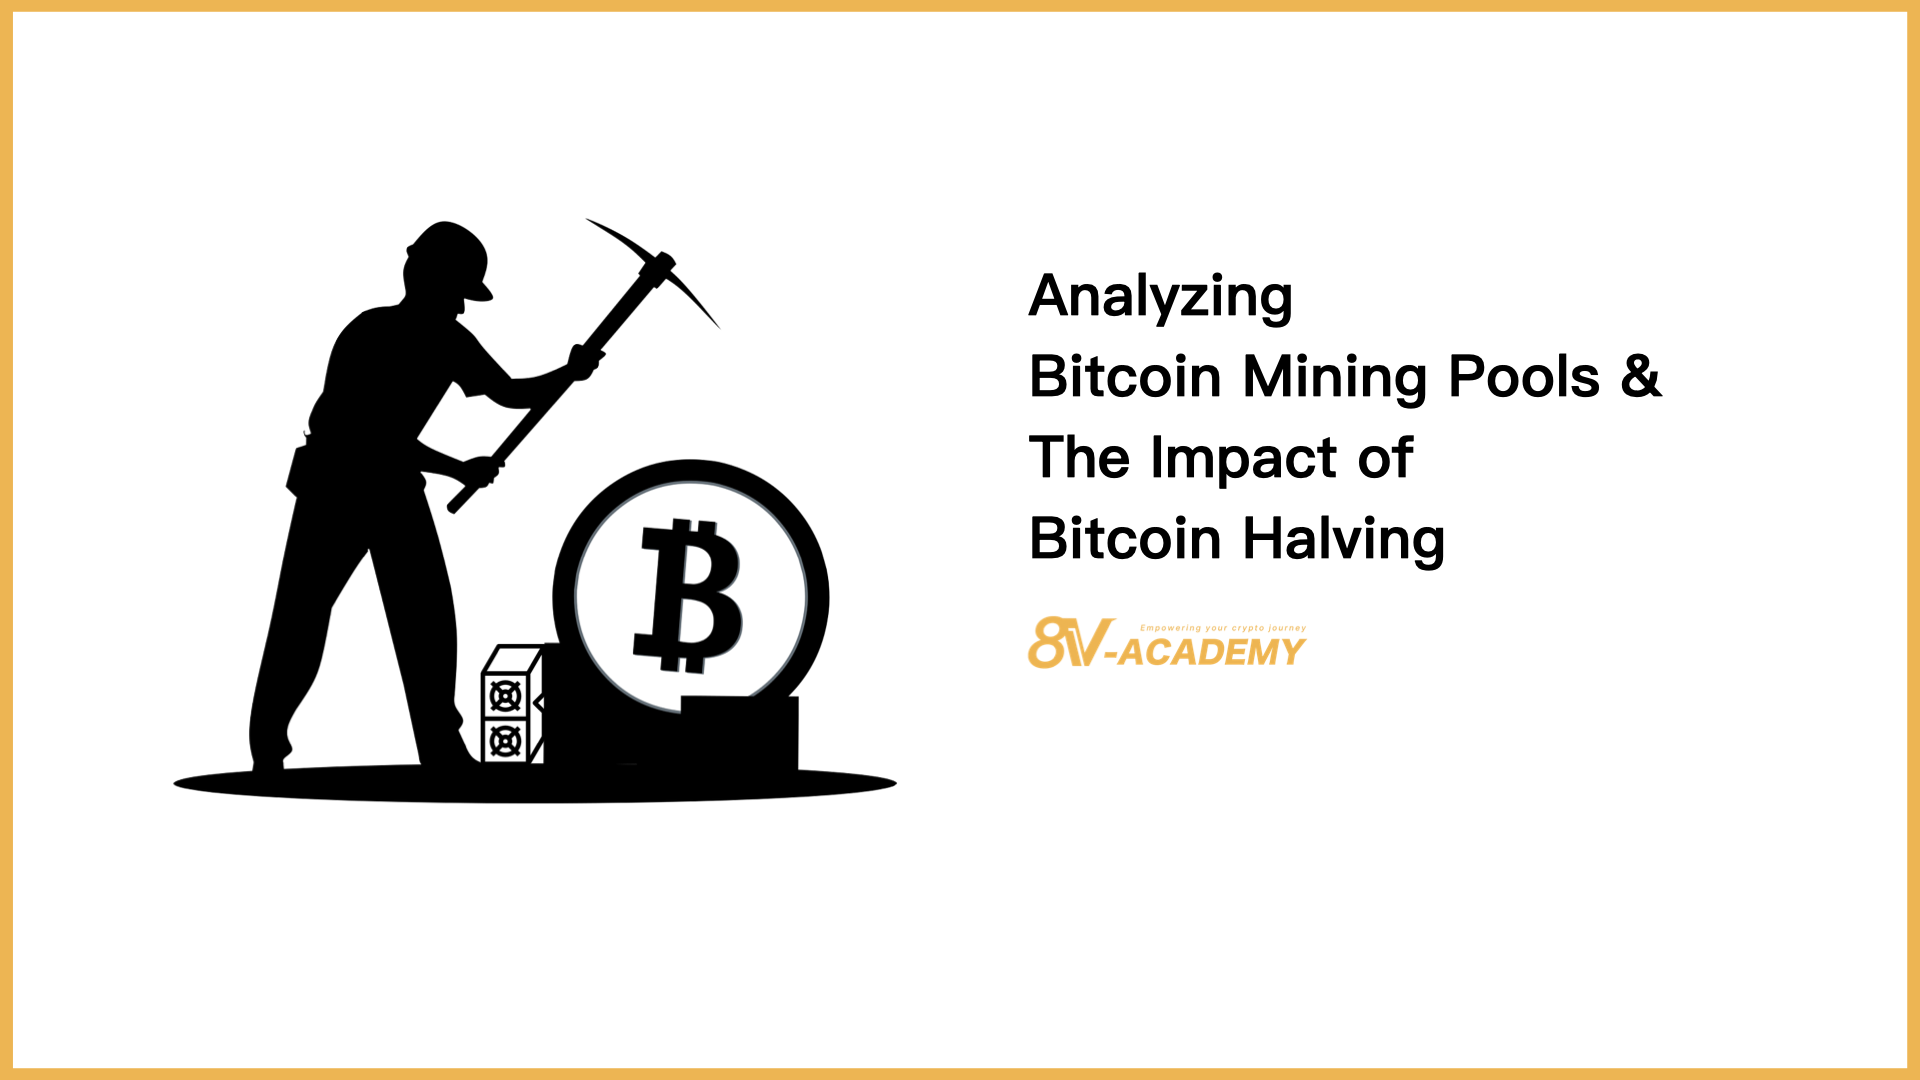 Analyzing Bitcoin Mining Pools and the Impact of Bitcoin Halving | 8V Academy powered by 8V.com